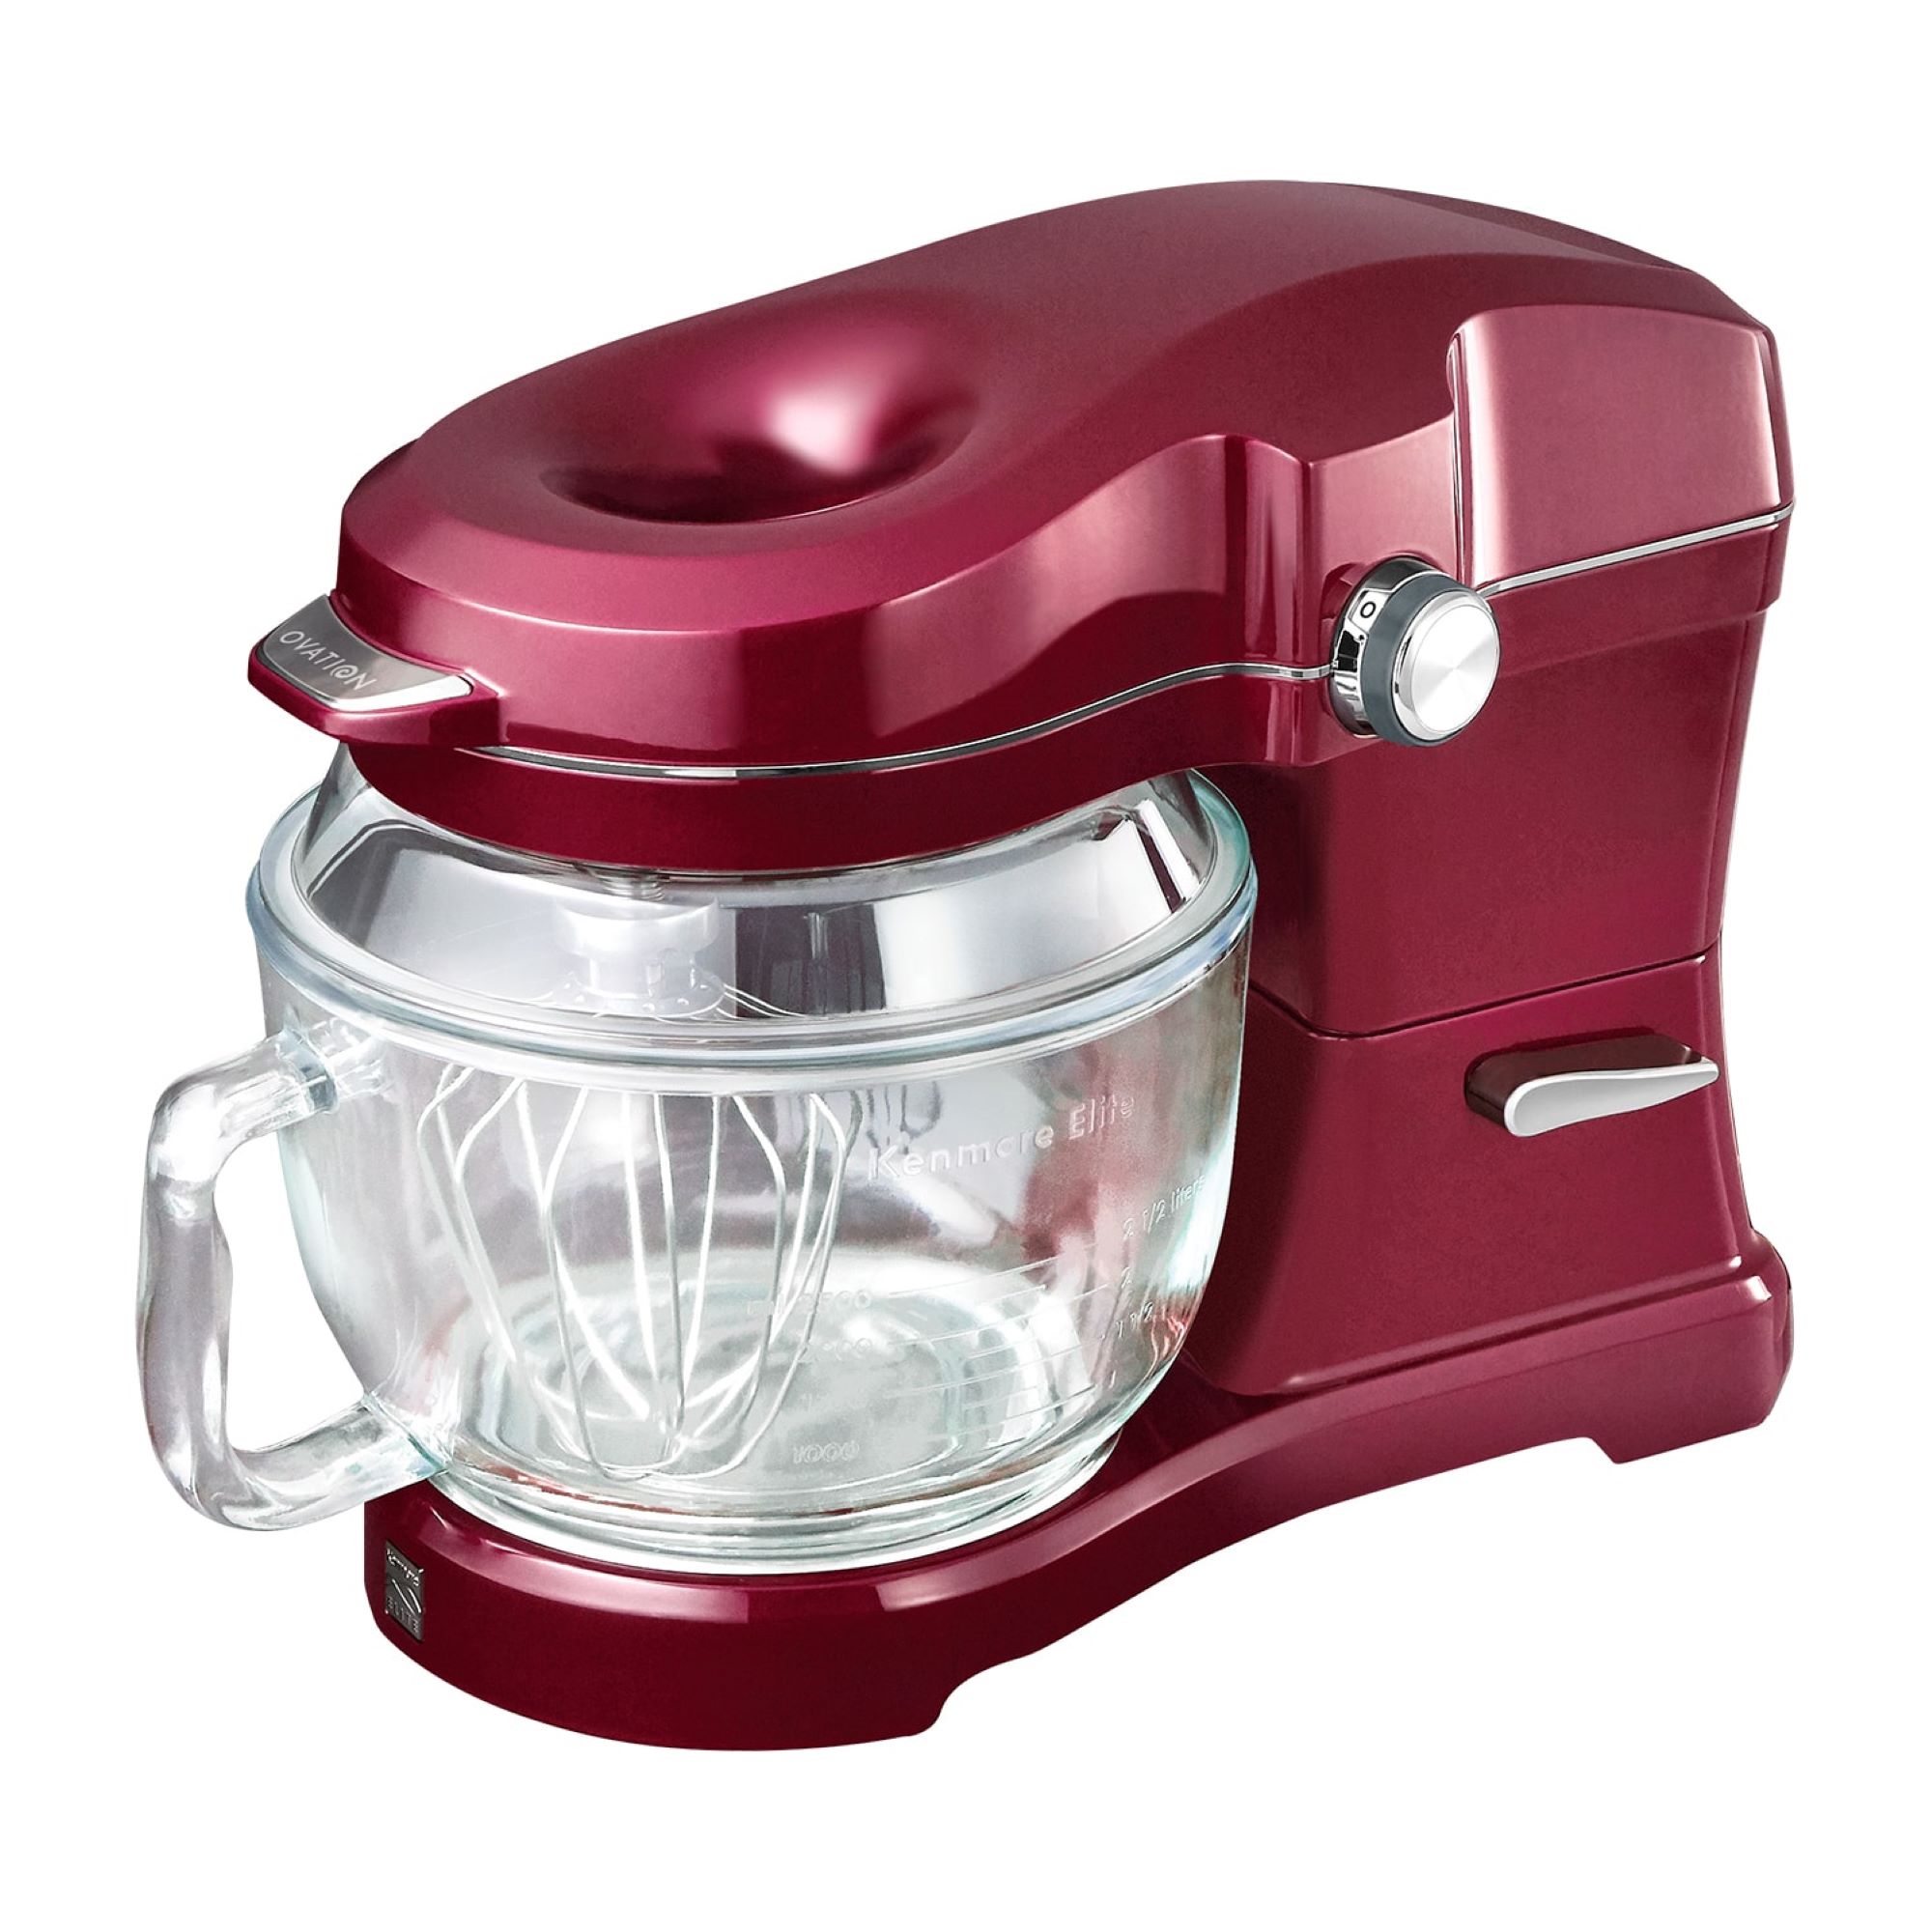 Kenmore Elite Ovation 5 qt Stand Mixer with Pour-In Top, 500W, Red